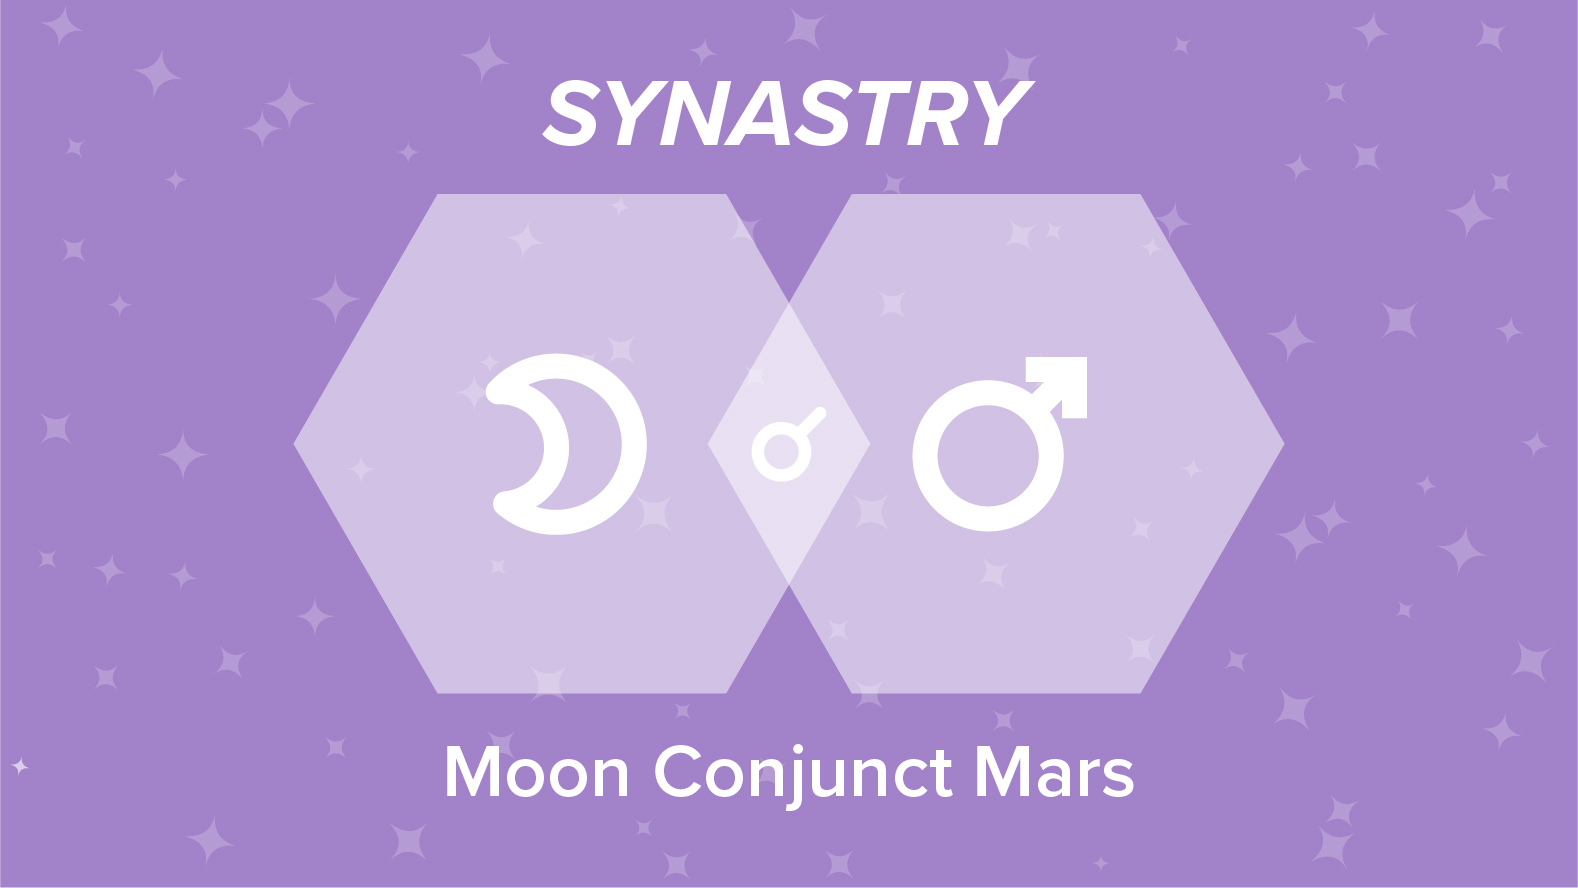 Moon Conjunct Mars Synastry: Relationships and Friendships Explained